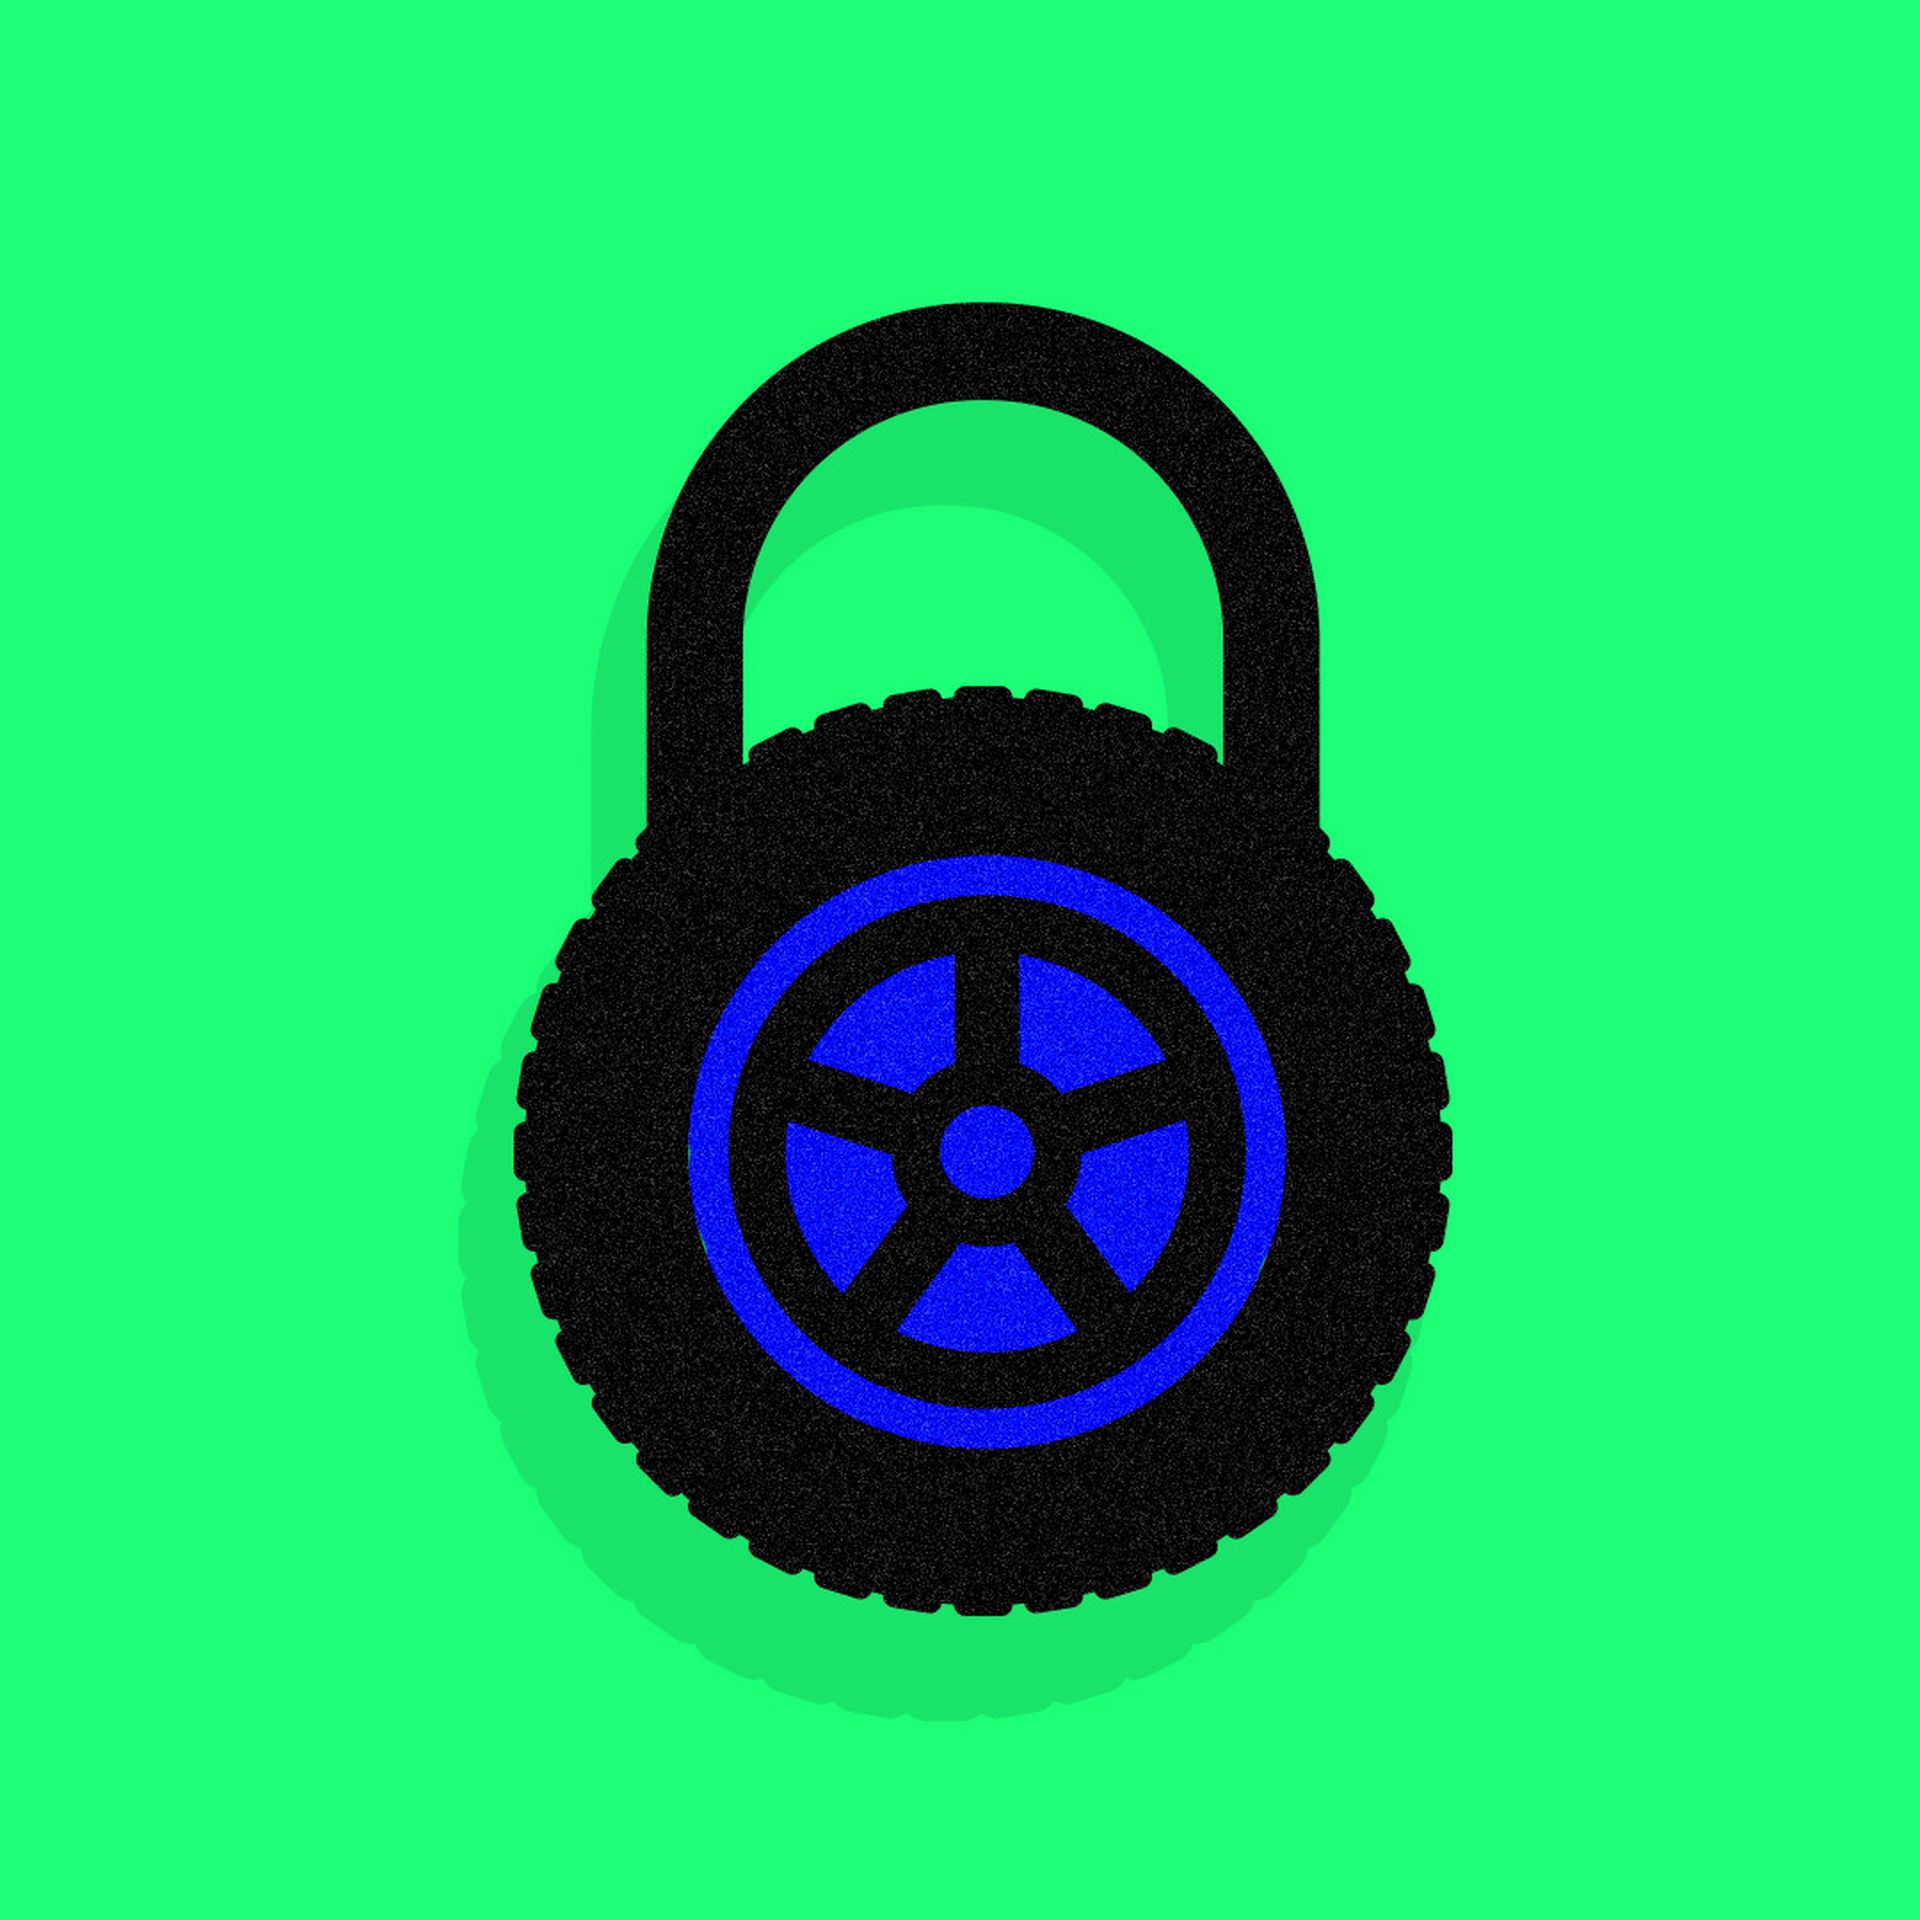 Illustration of a padlock made out of a tire